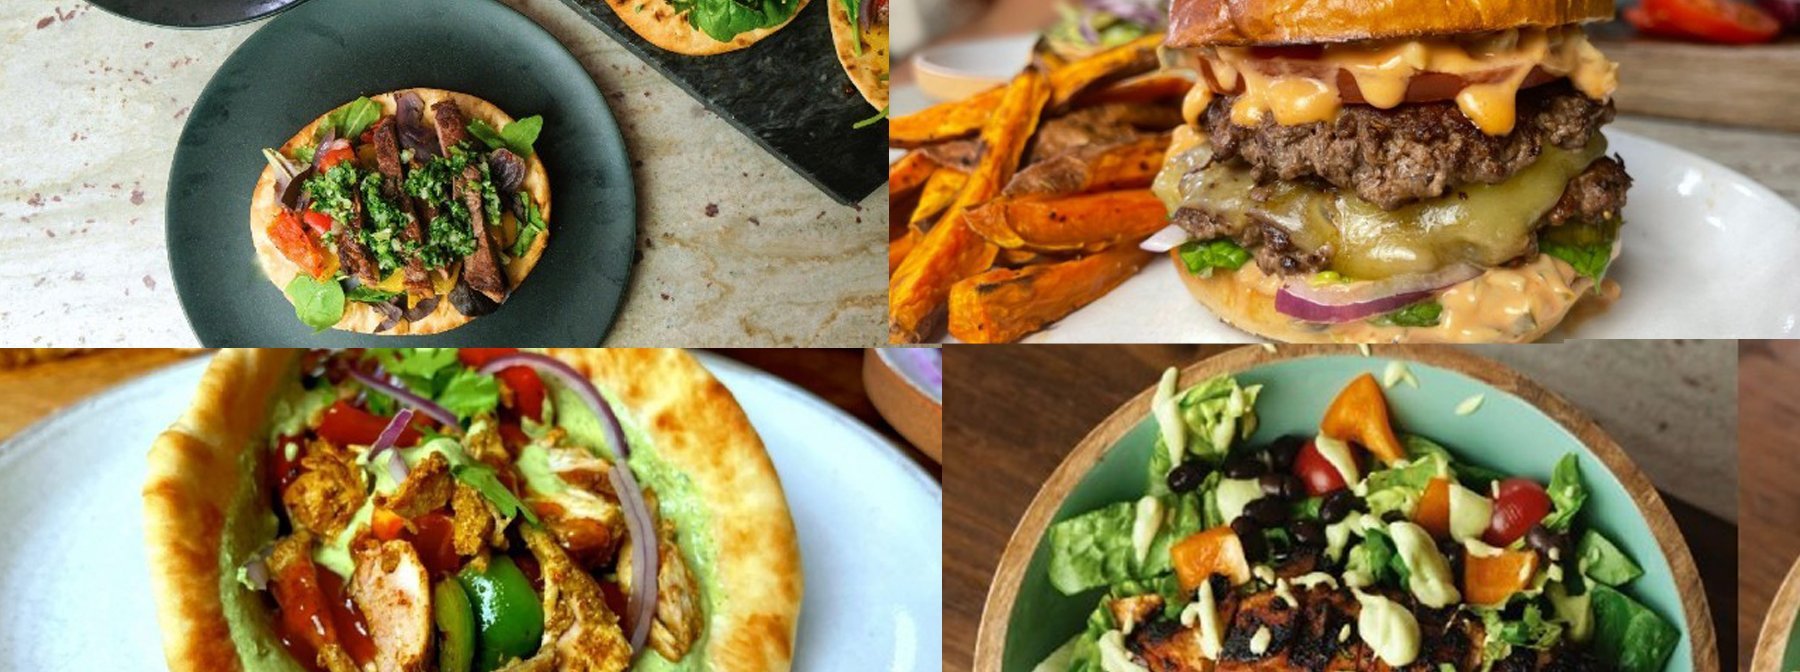 8 Recipes For Your Barbeque That Aren’t Boring Burgers